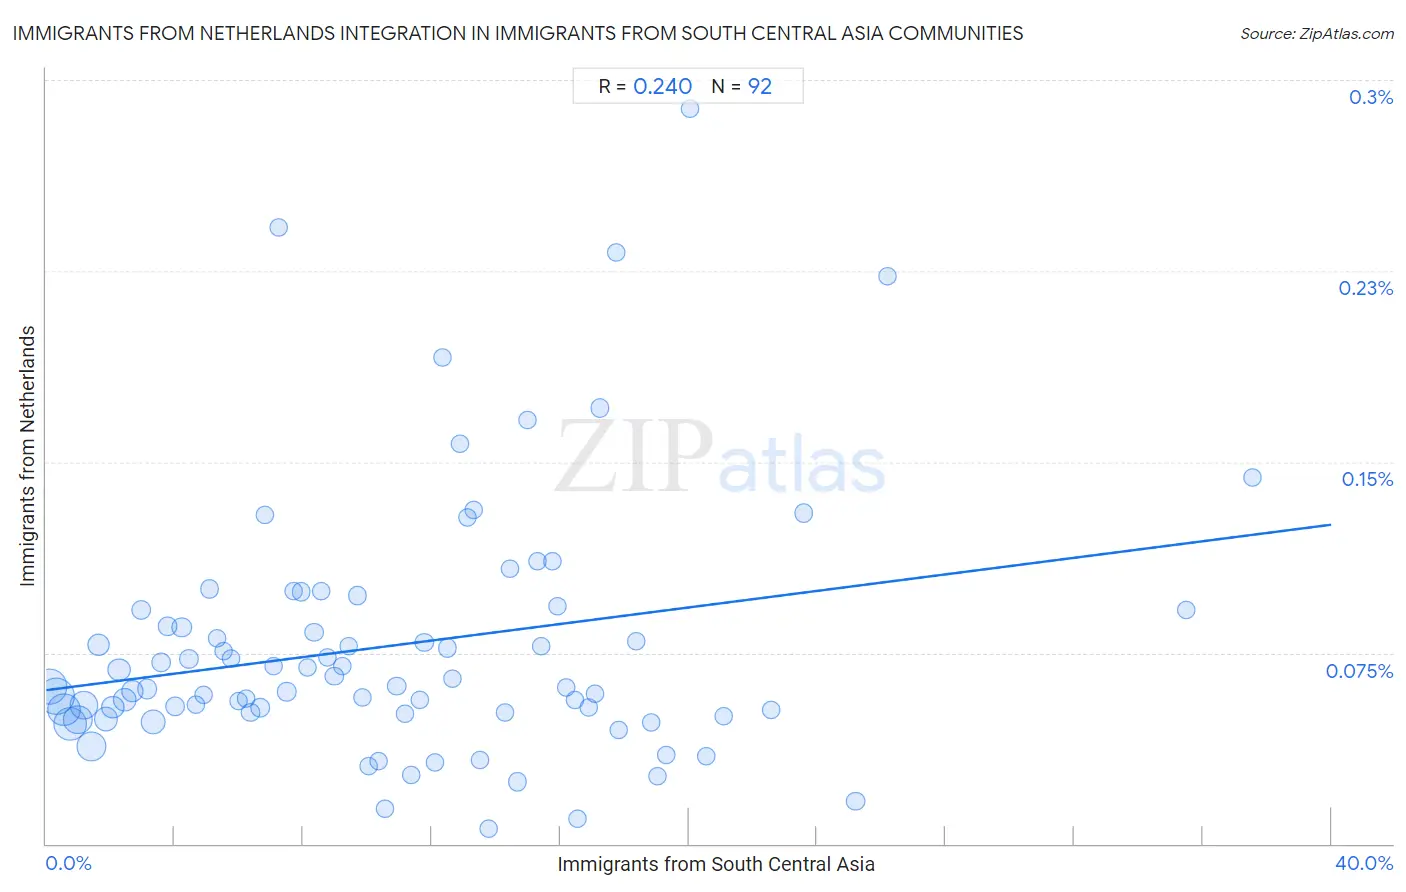 Immigrants from South Central Asia Integration in Immigrants from Netherlands Communities